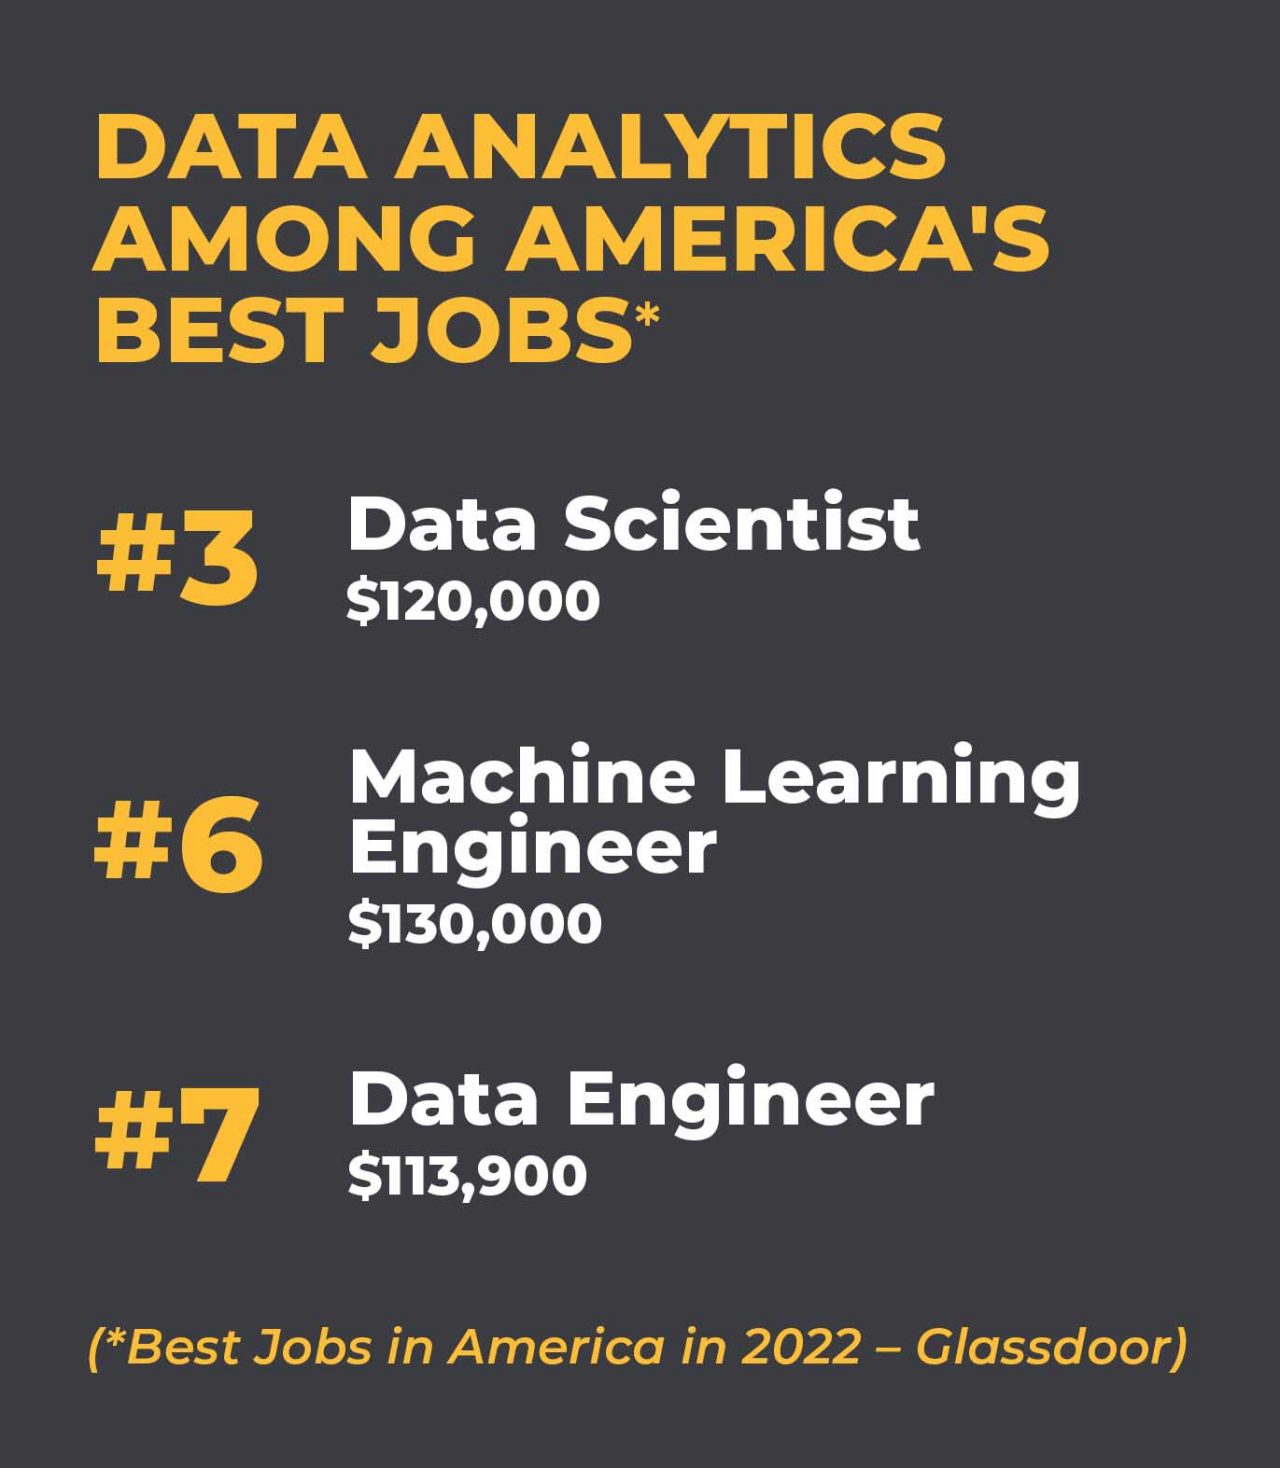 Text that reads, "Data Analytics Among America's Best Jobs; #3 Data Scientist $120,000; #6 Machine Learning Engineer $130,000; #7 Data Engineer $113,900; (Best Jobs in America in 2022 - Glassdoor)."